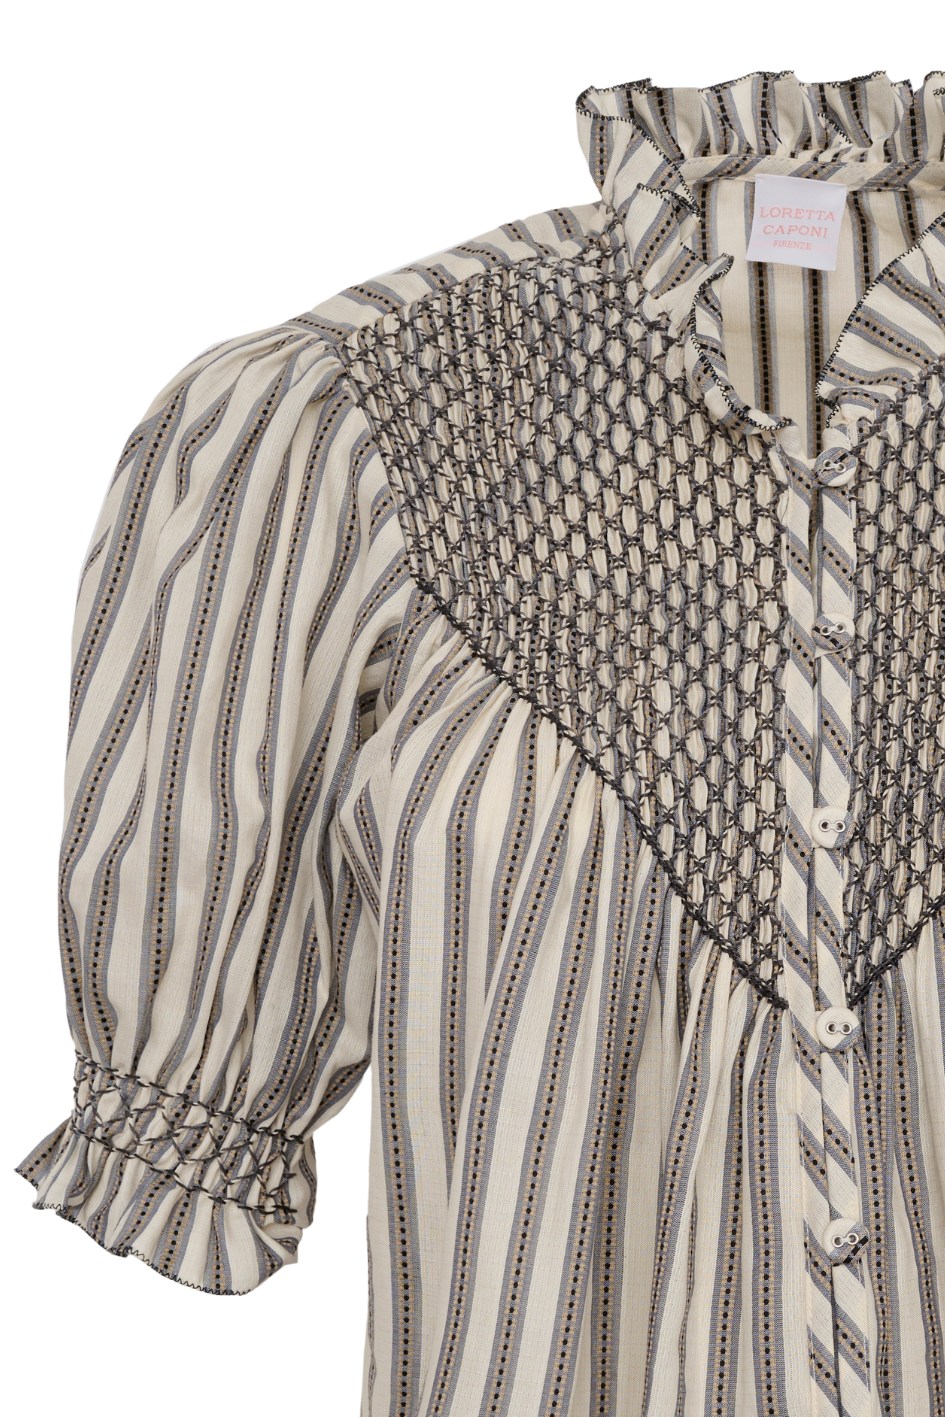 Stripped Blouse with puffed Sleeves